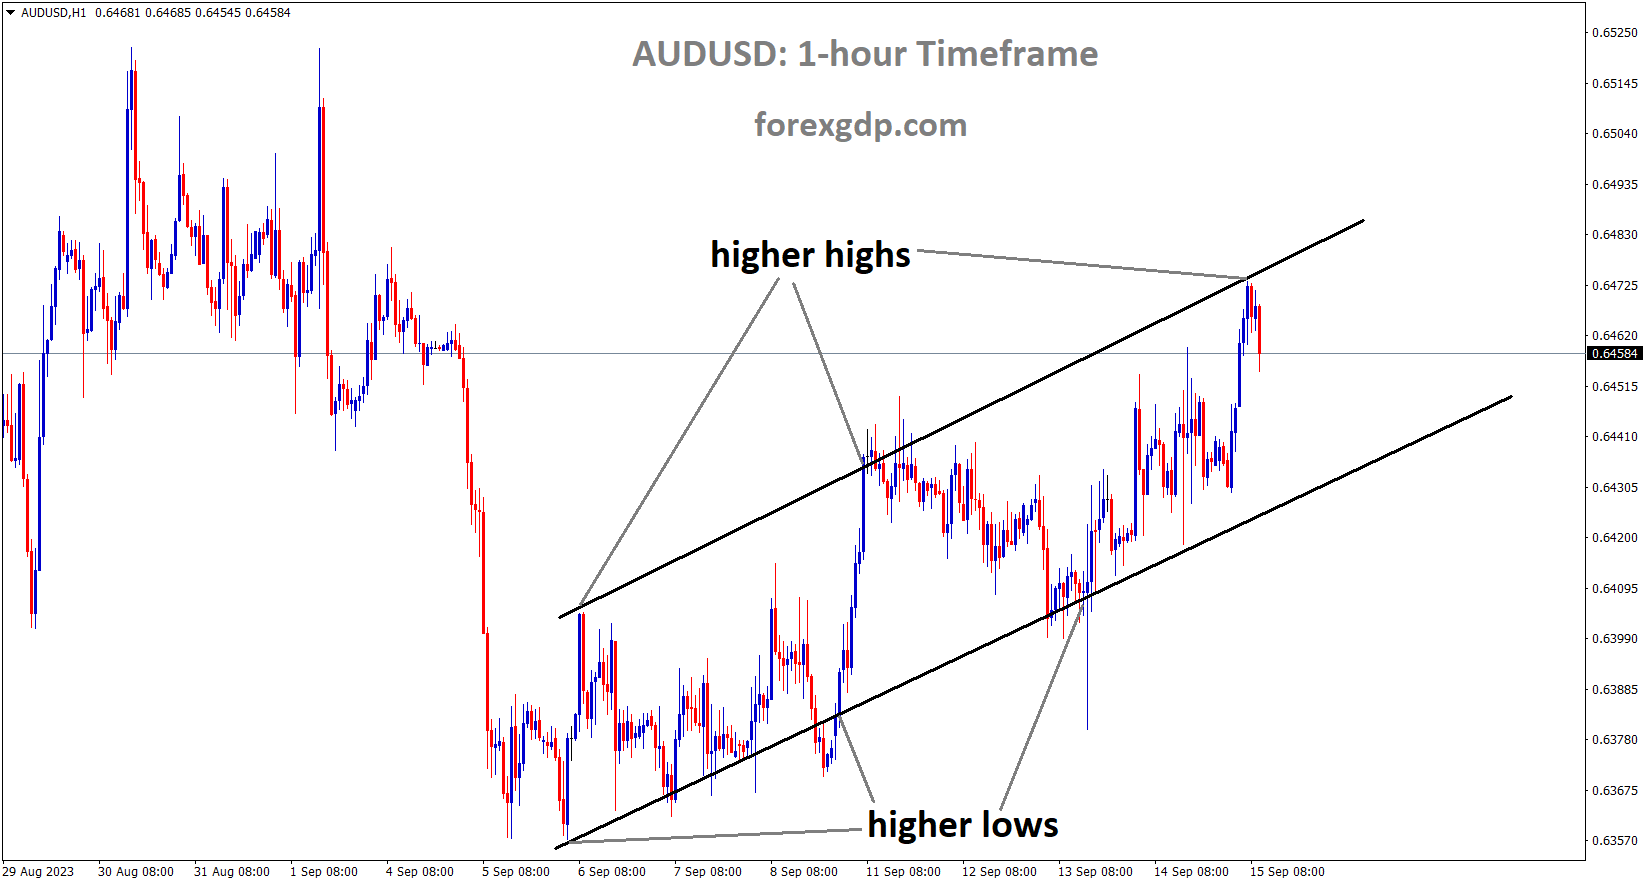 AUDUSD is moving in an Ascending channel and the market has fallen from the higher high area of the channel